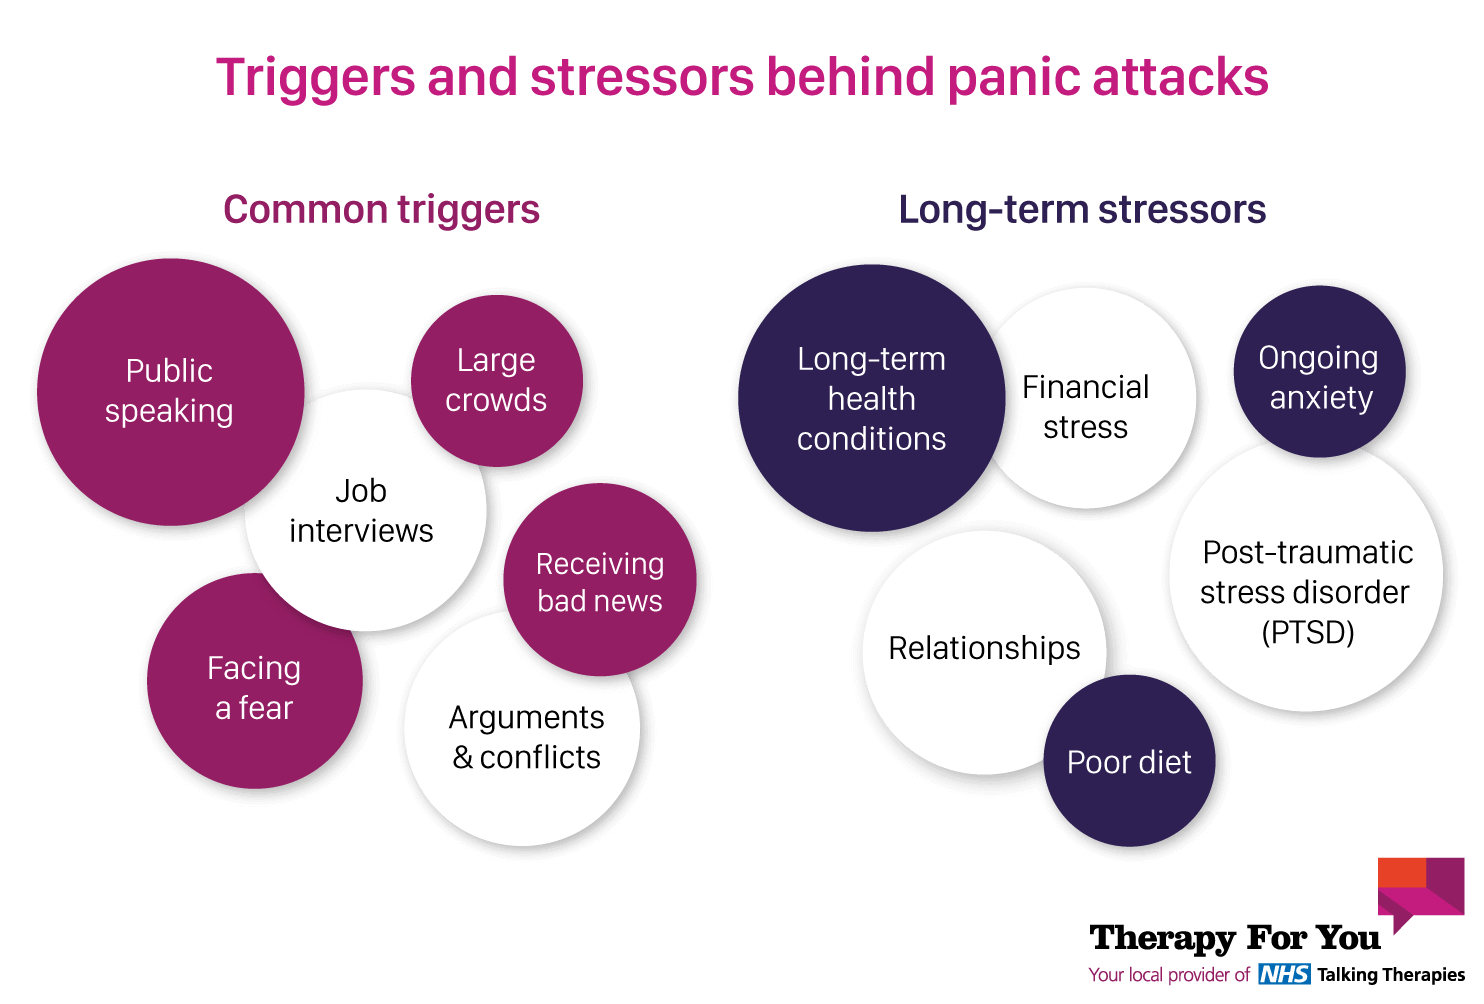 Infographic by Therapy For You: What causes panic attacks? Common triggers and long-term stressors behind panic attacks